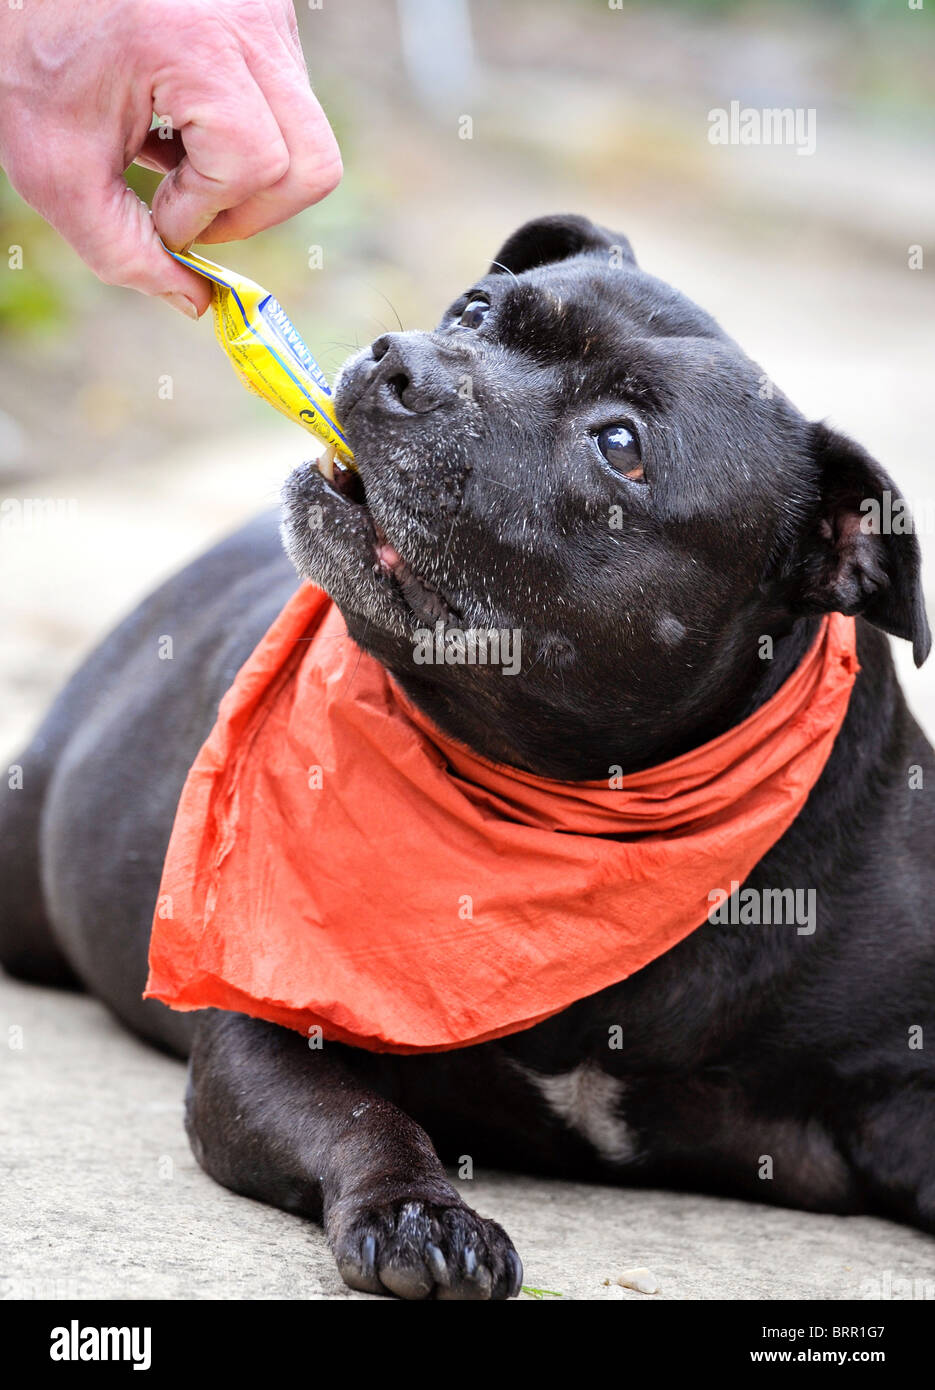 A hungry Staffordshire bull terrier eating a sachet of mayonnaise. Picture by Jim Holden. Stock Photo